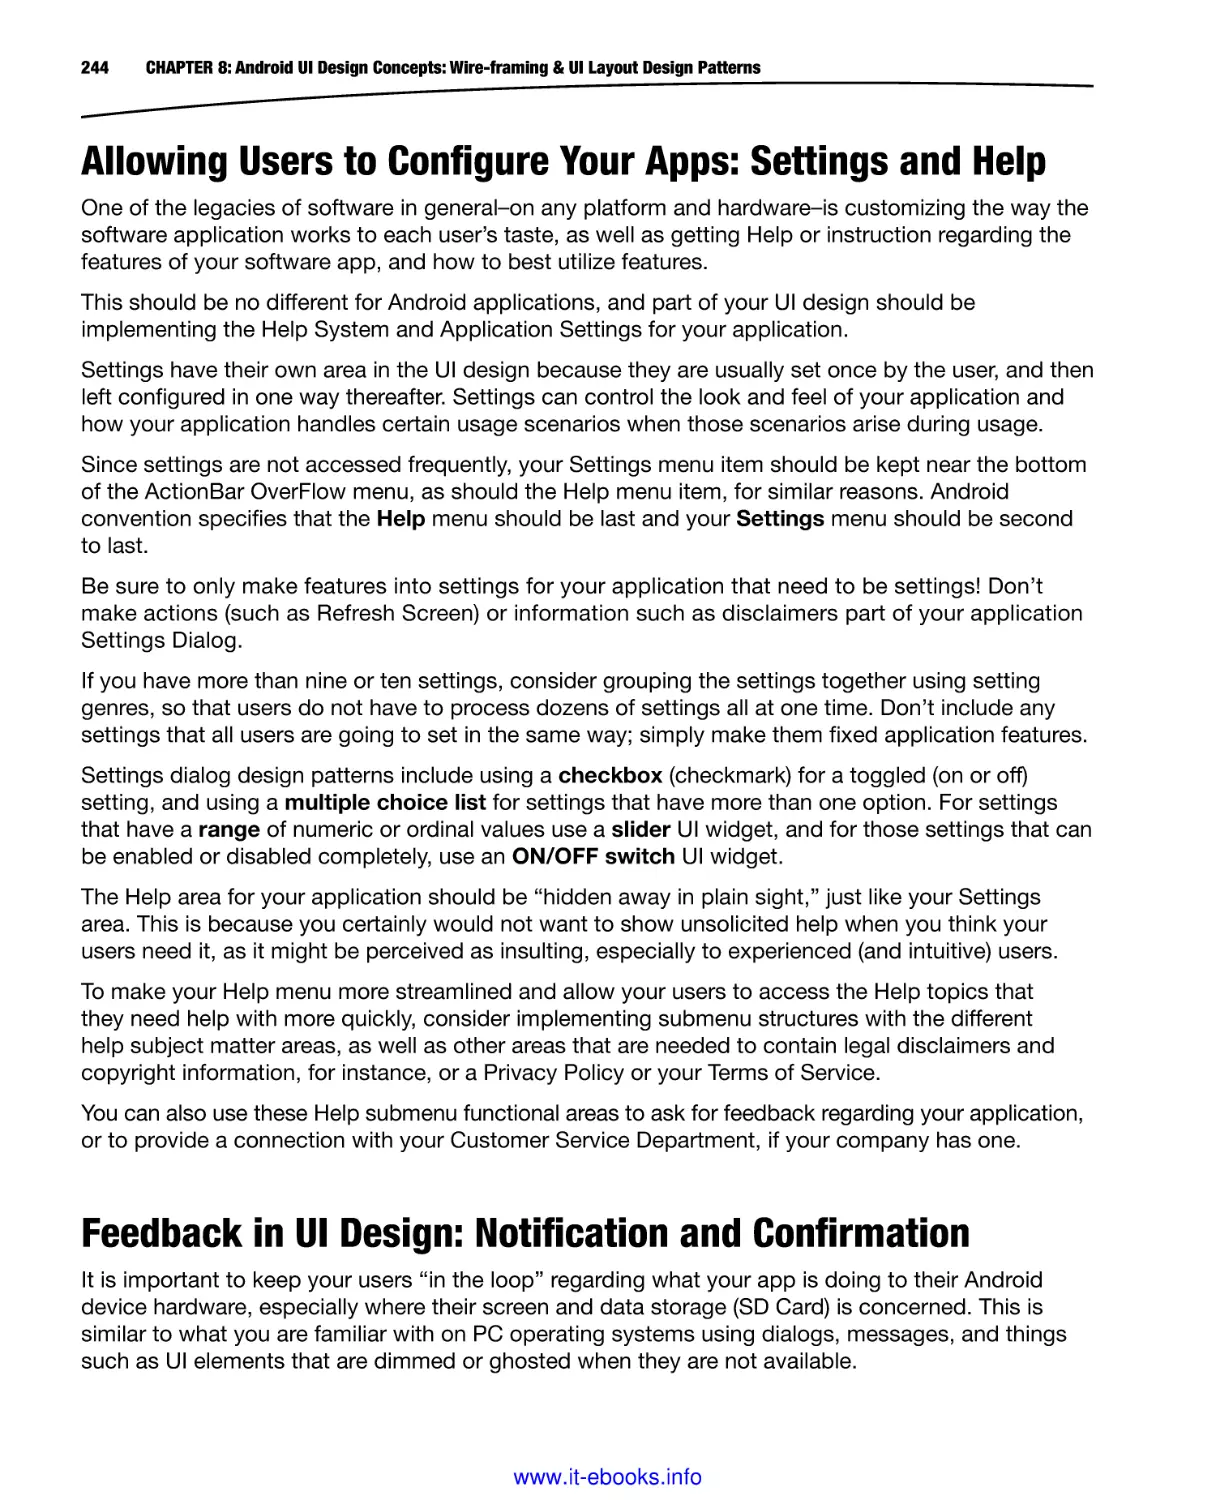 Allowing Users to Configure Your Apps
Feedback in UI Design